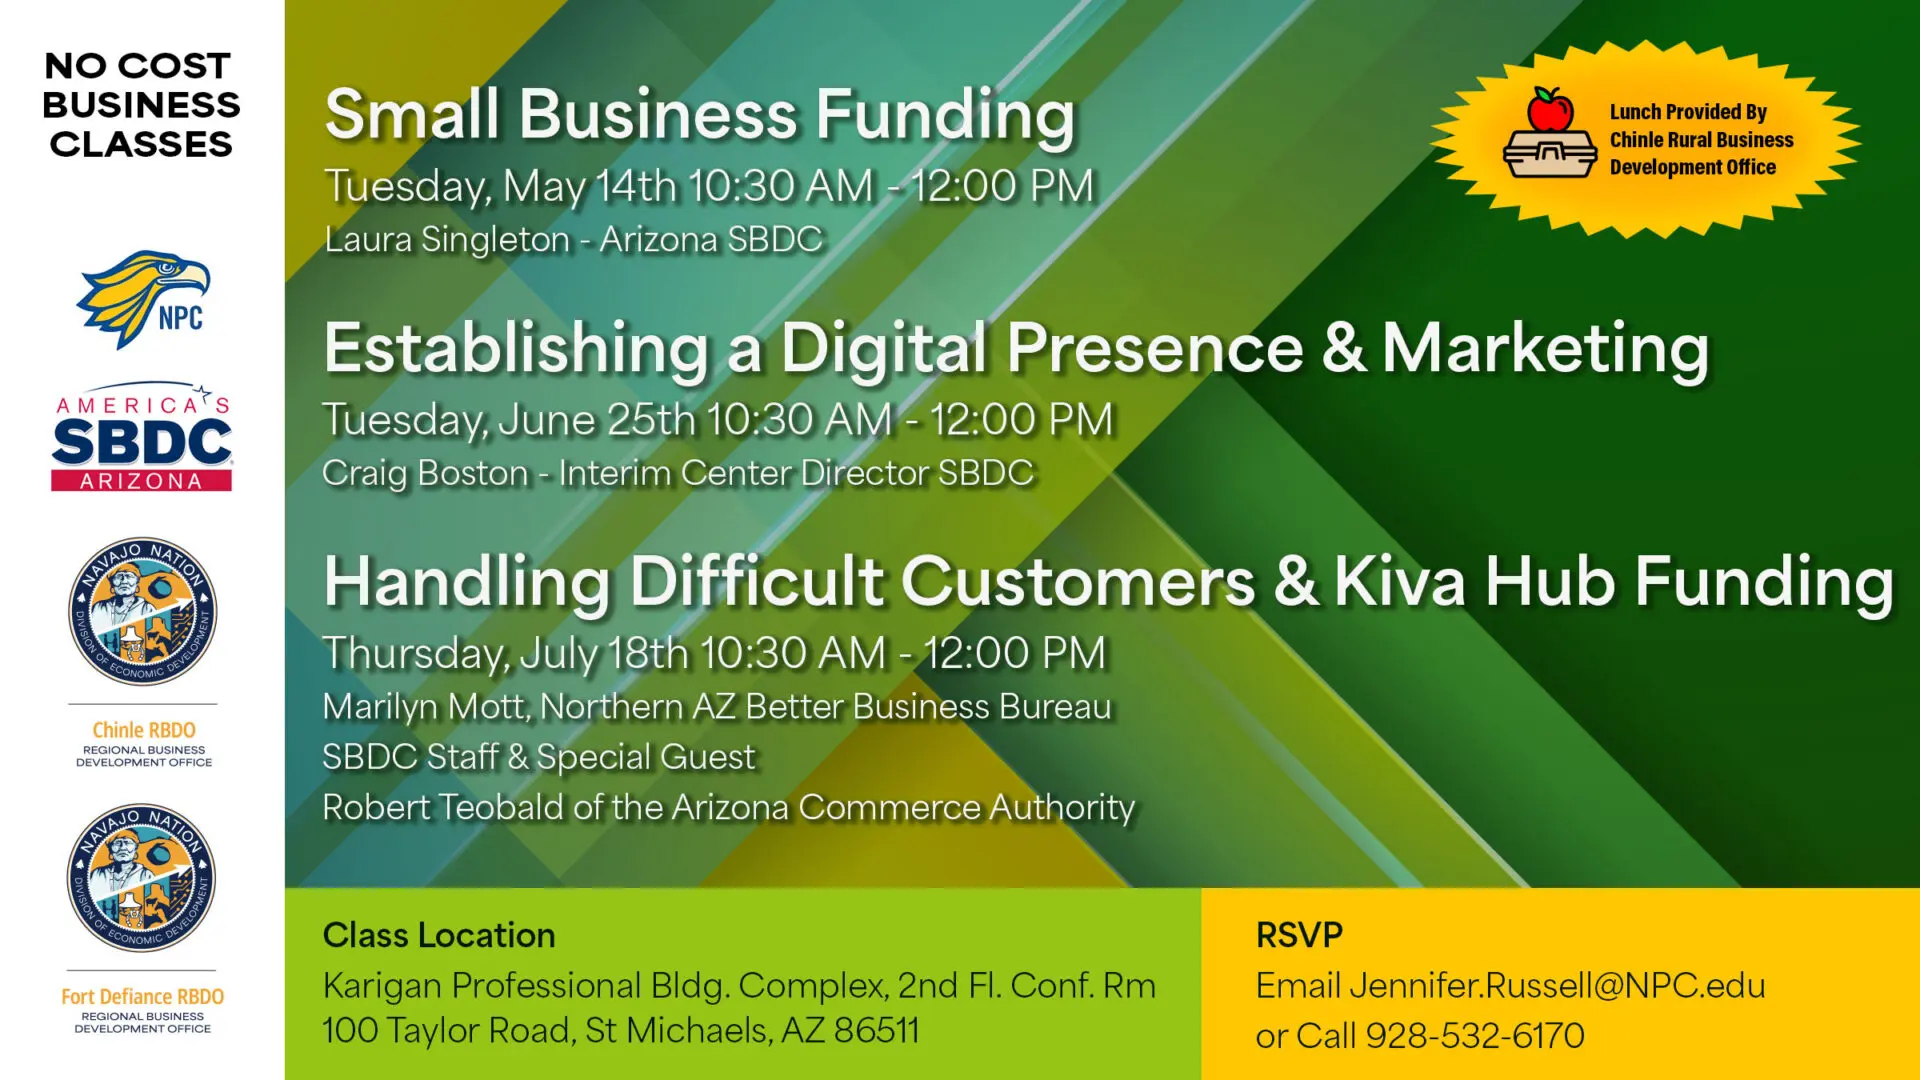 No Cost Business Classes hosted by the Fort Defiance RBDO on May 14th, June 25th, and July 18th. Classes held from 10:30 AM to 12:00 PM; lunch will be provided.